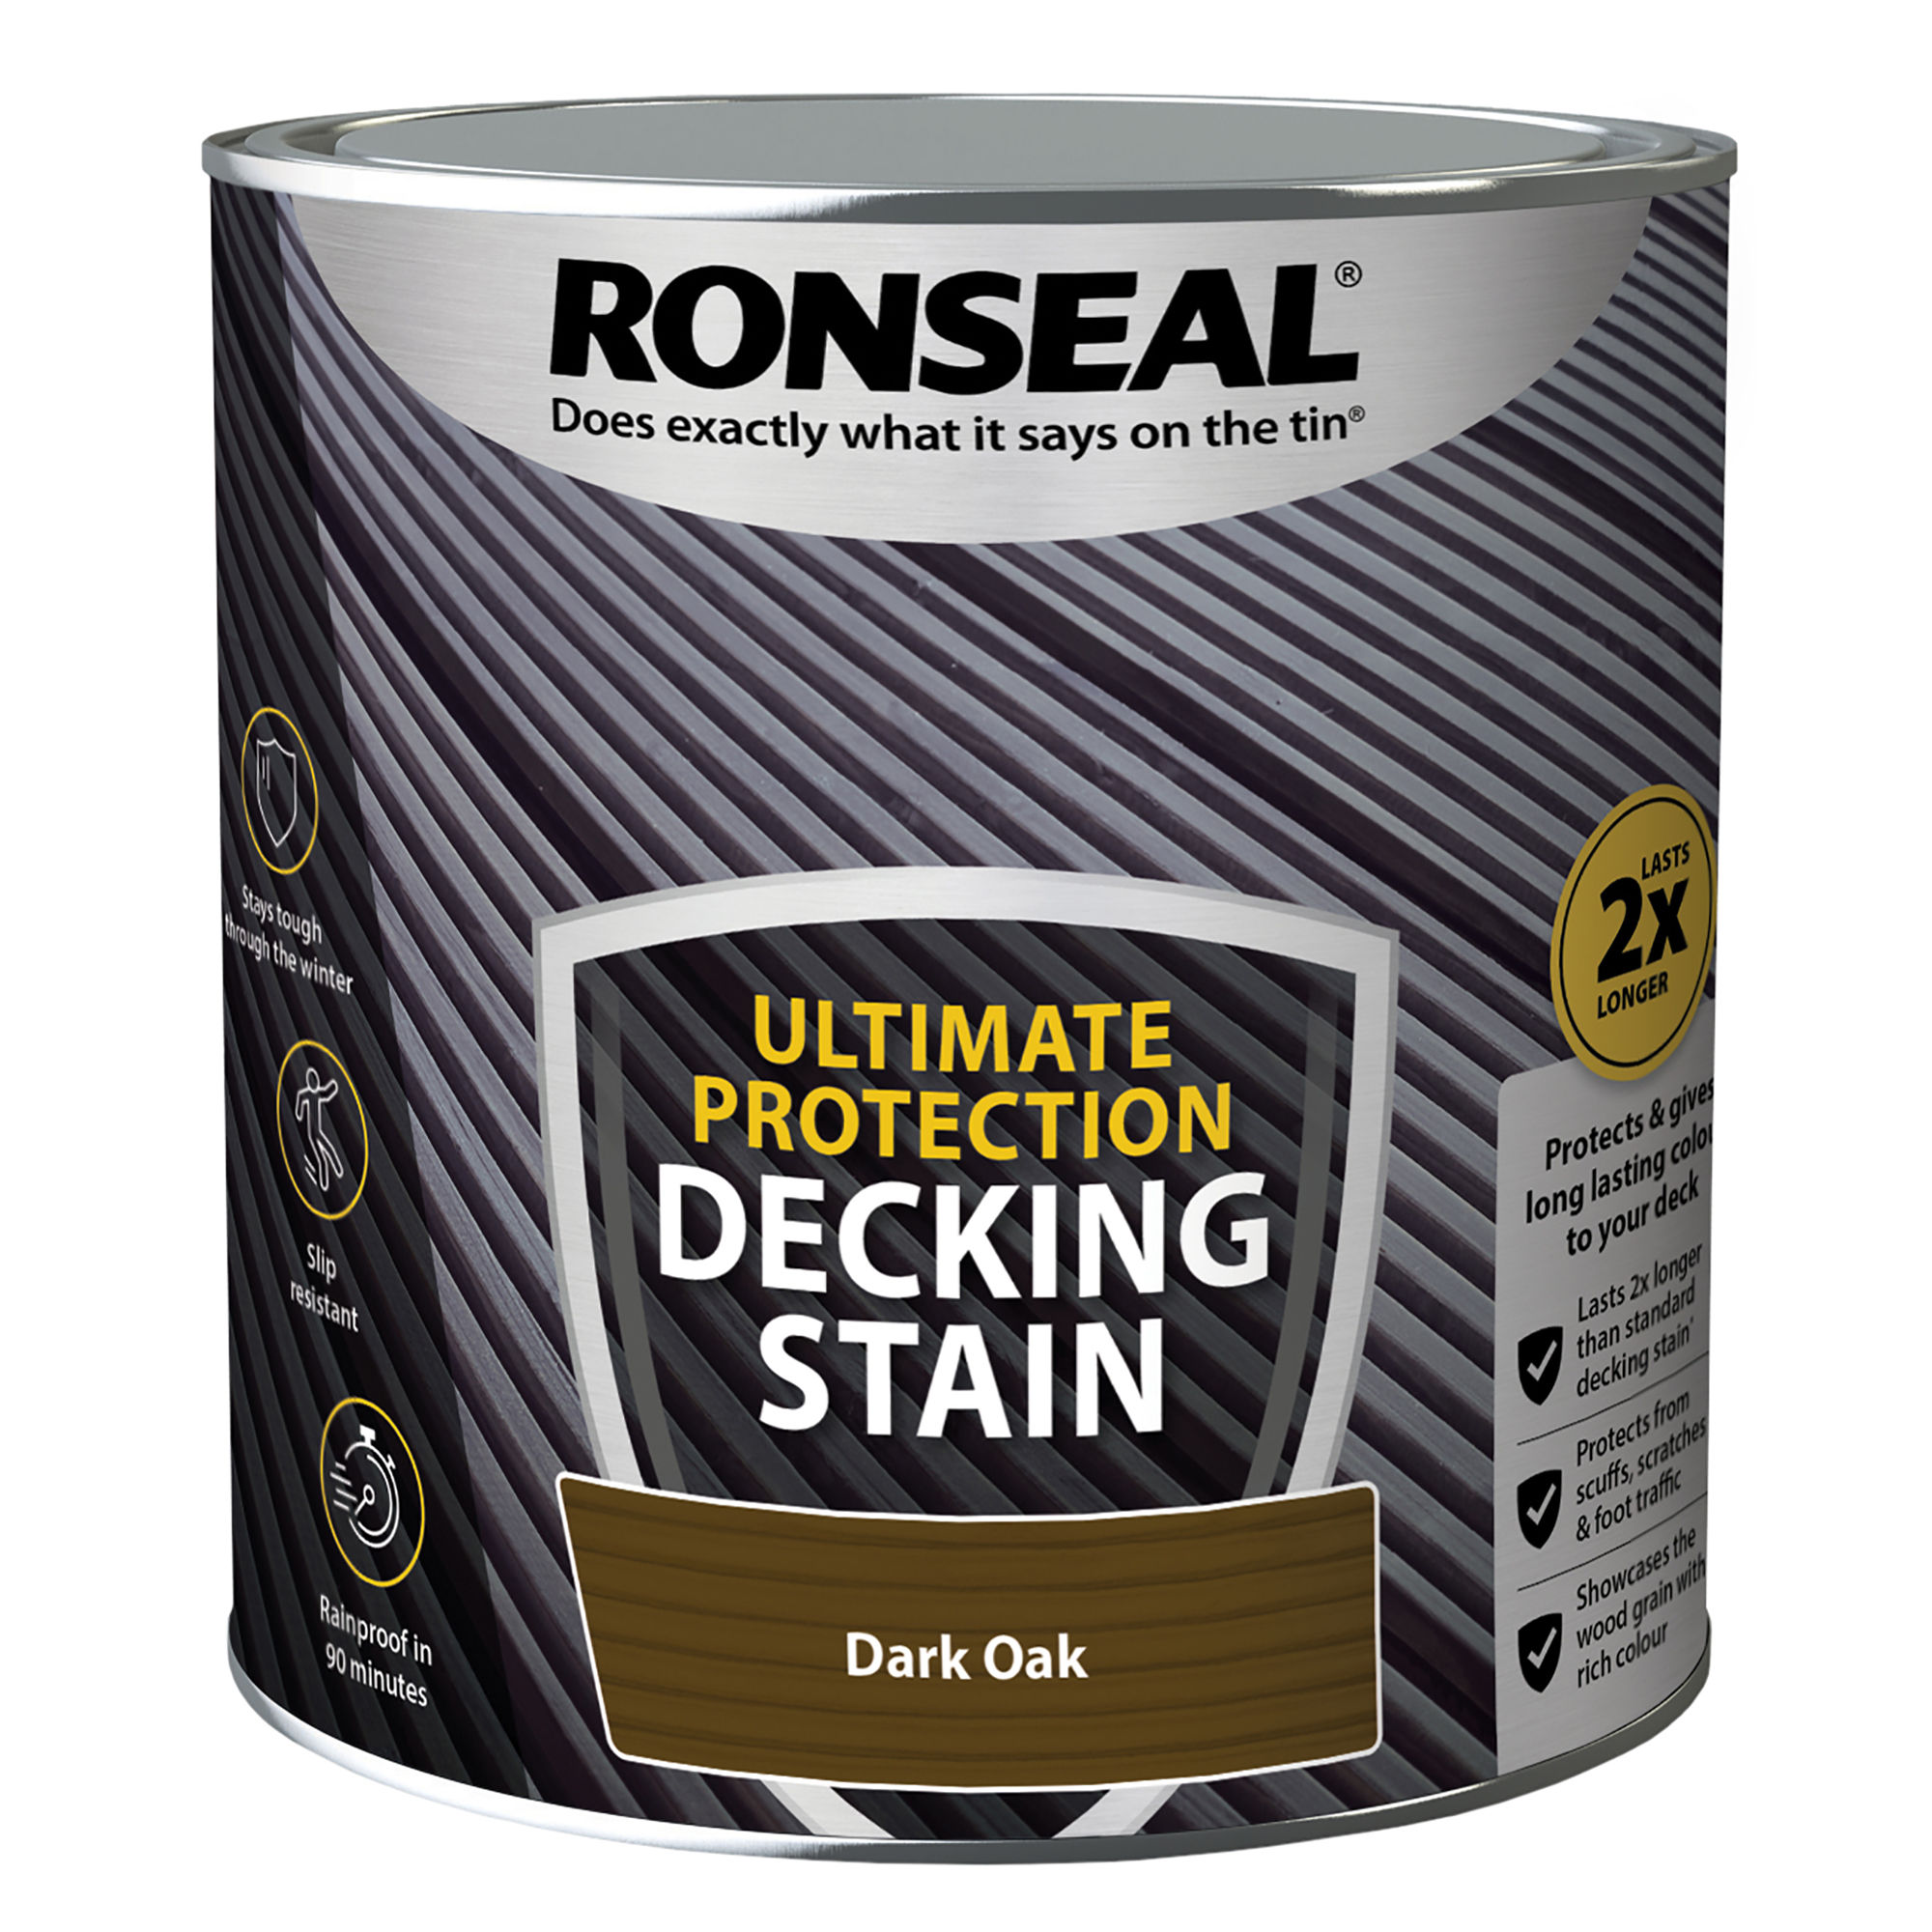 Ronseal Ultimate Protection Decking Stain - Dark Oak (2.5L)